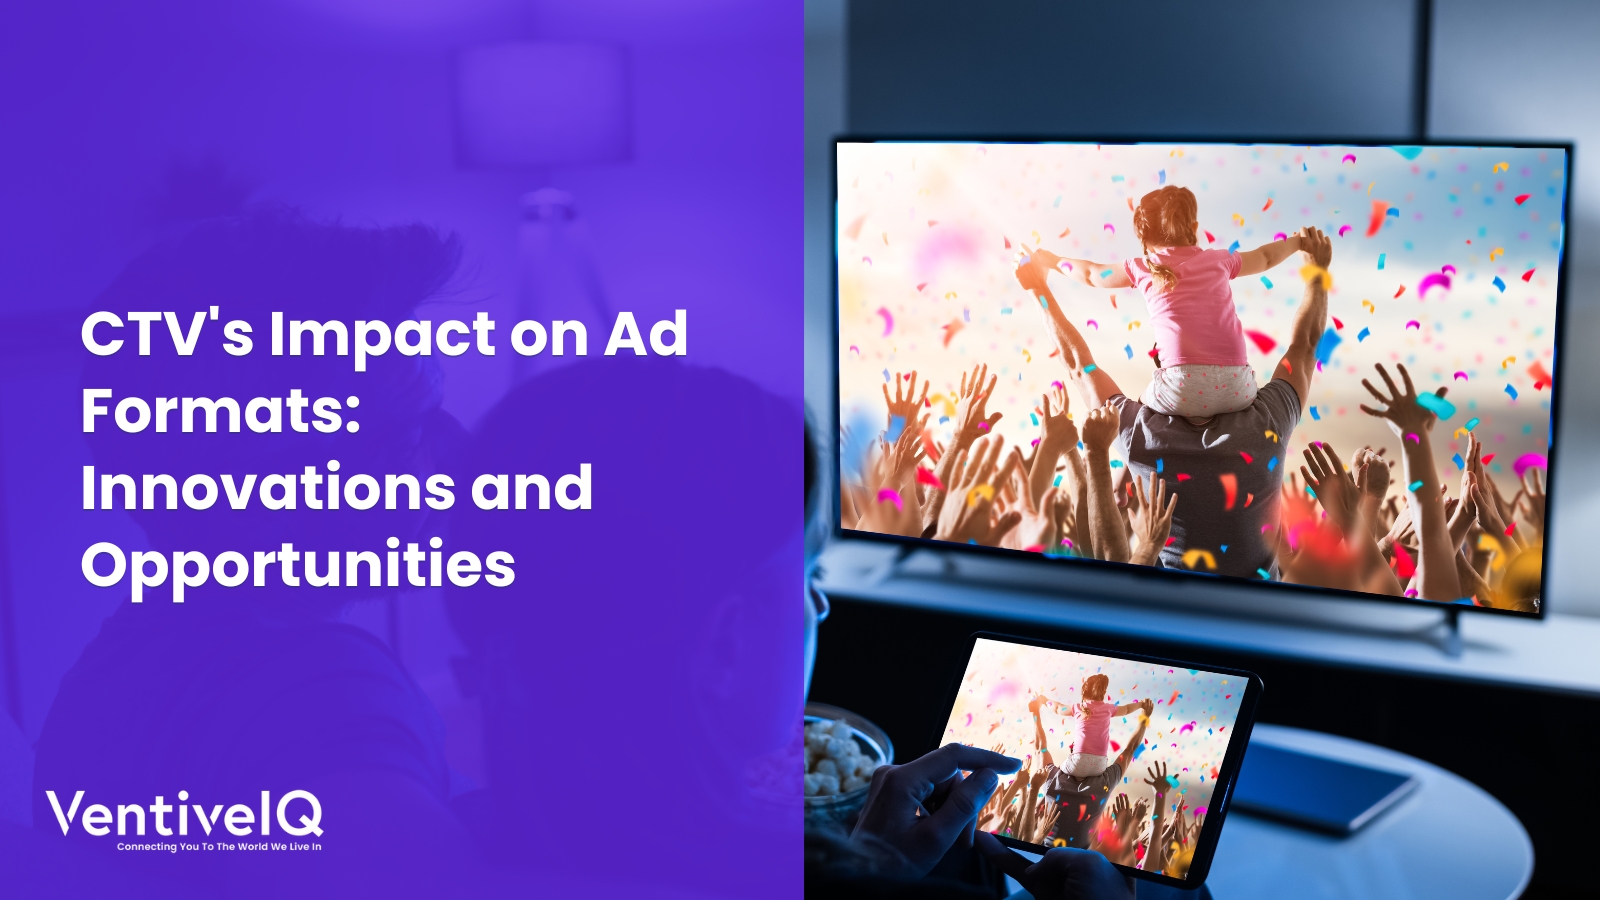 CTV’s Impact on Ad Formats: Innovations and Opportunities